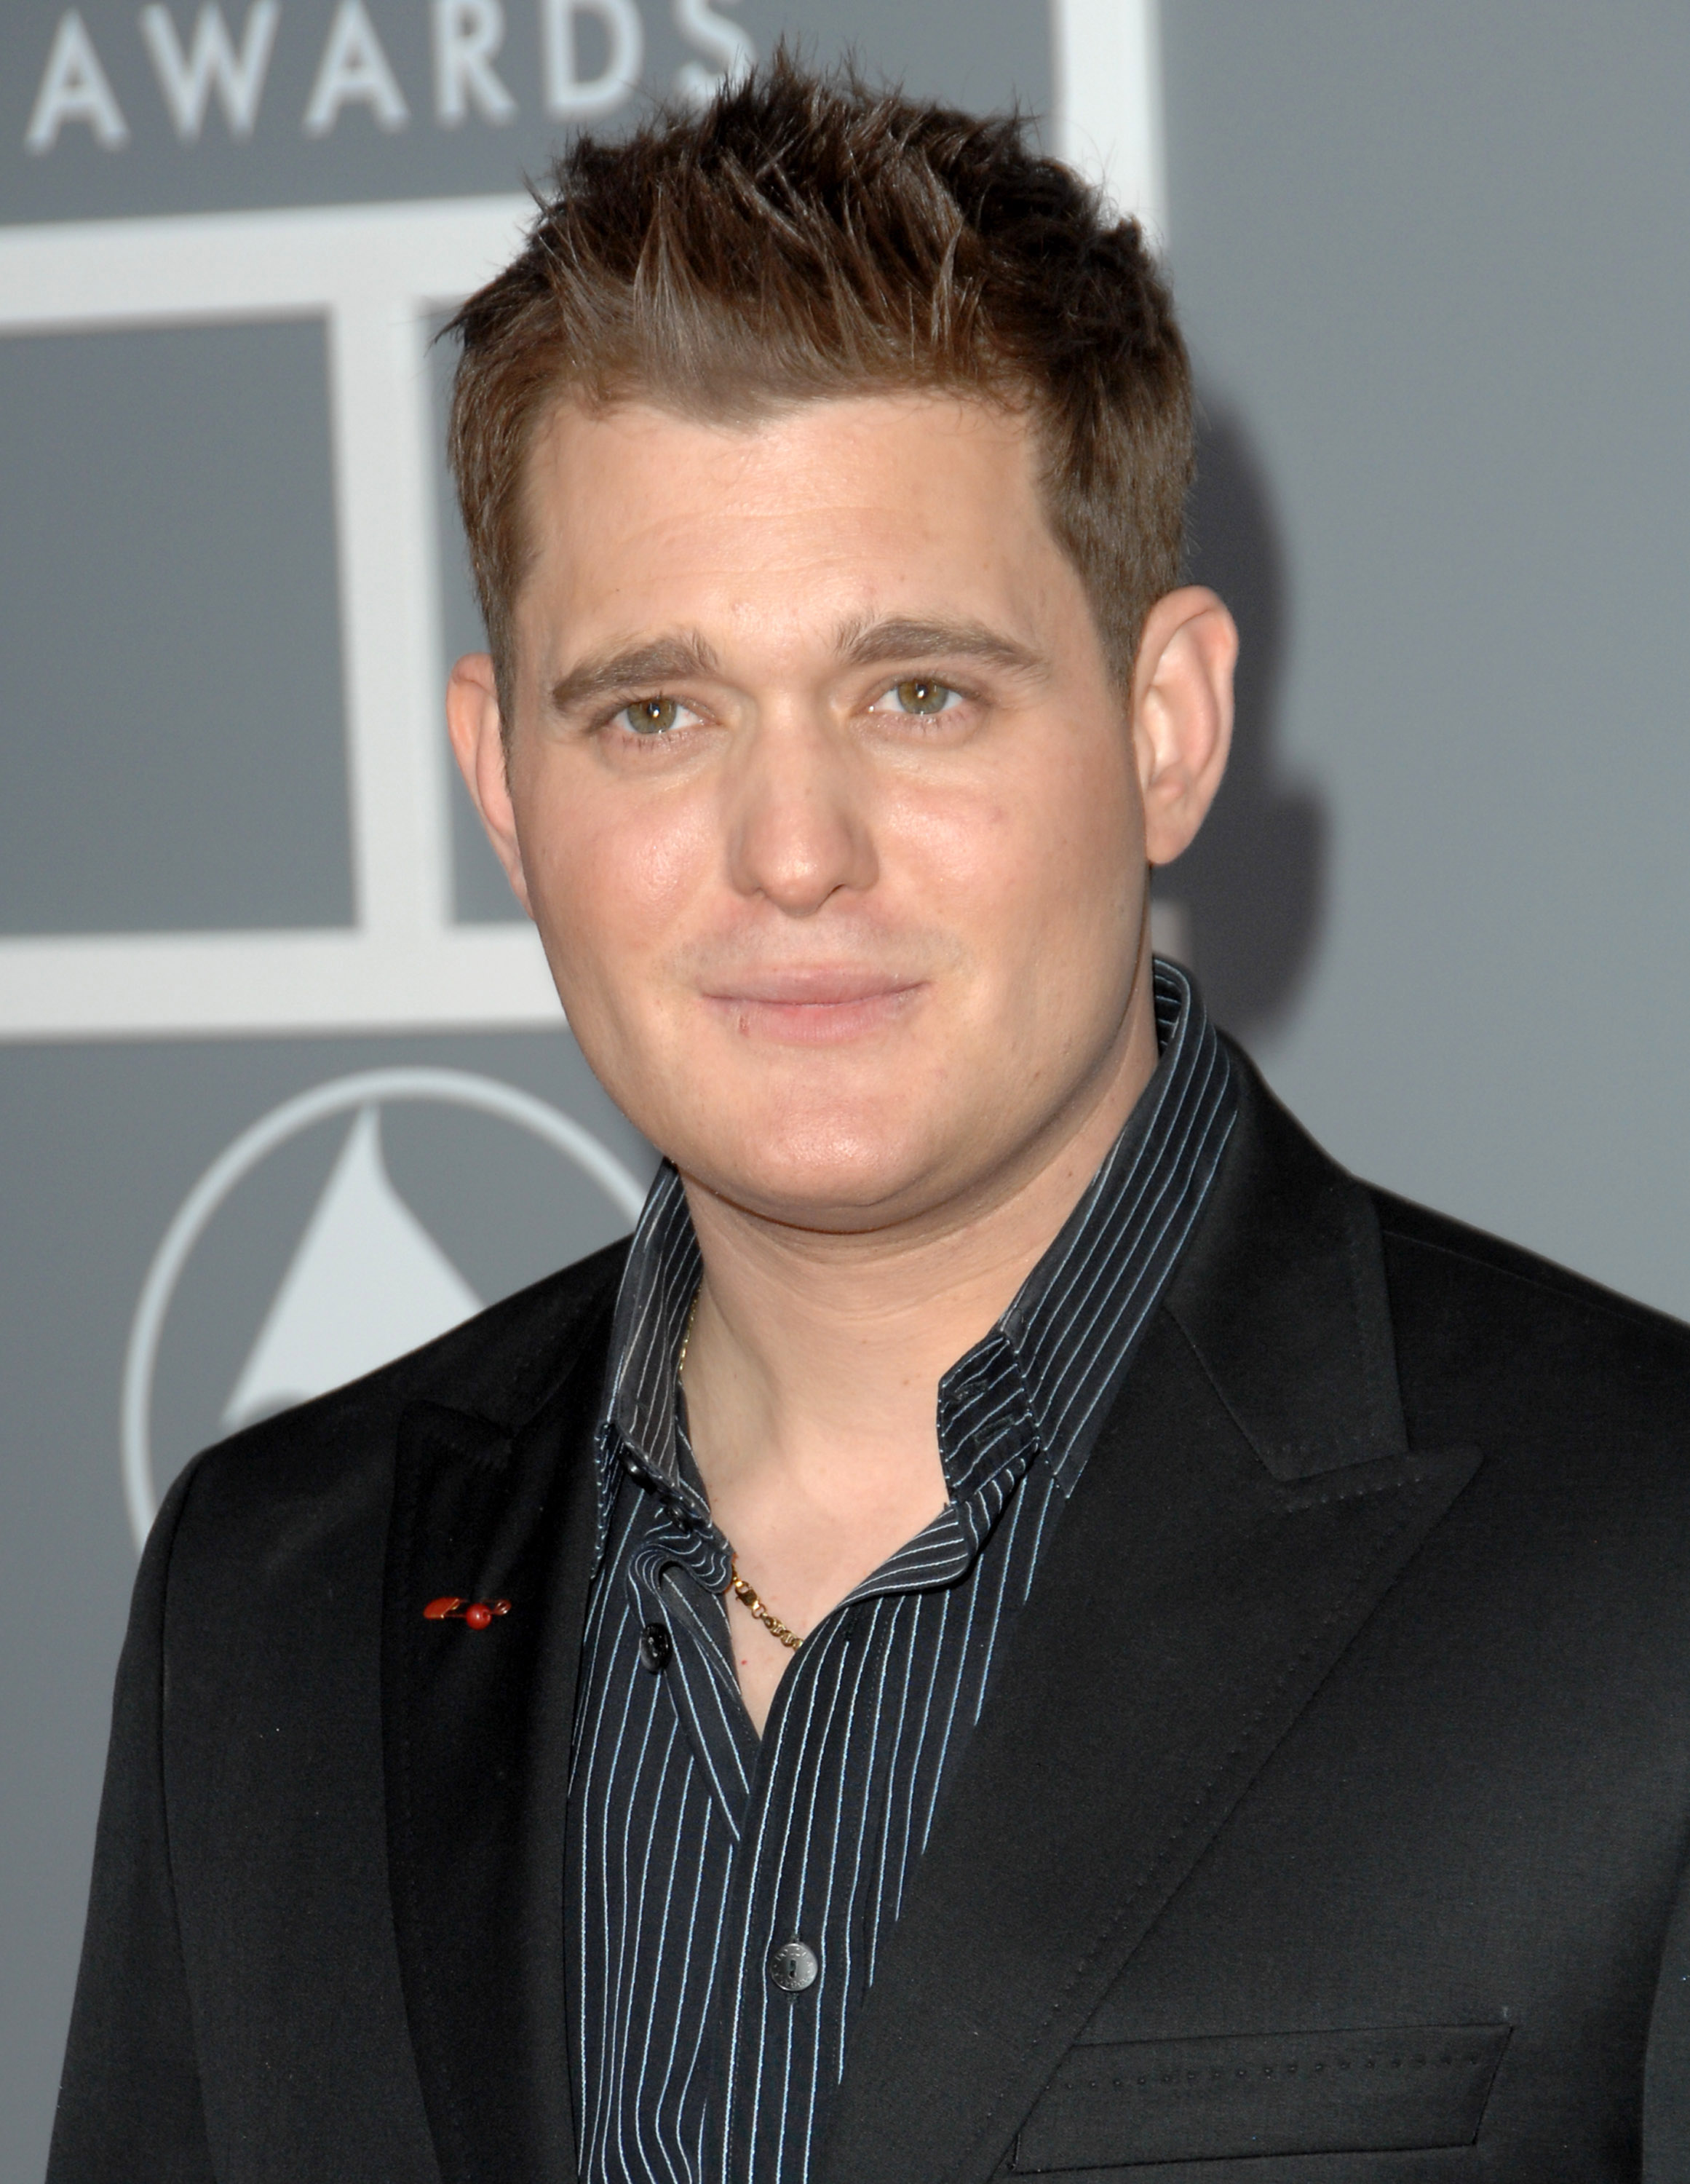 Michael Bublé at the 49th Annual Grammy Awards in Los Angeles, California in 2007 | Source: Getty Images